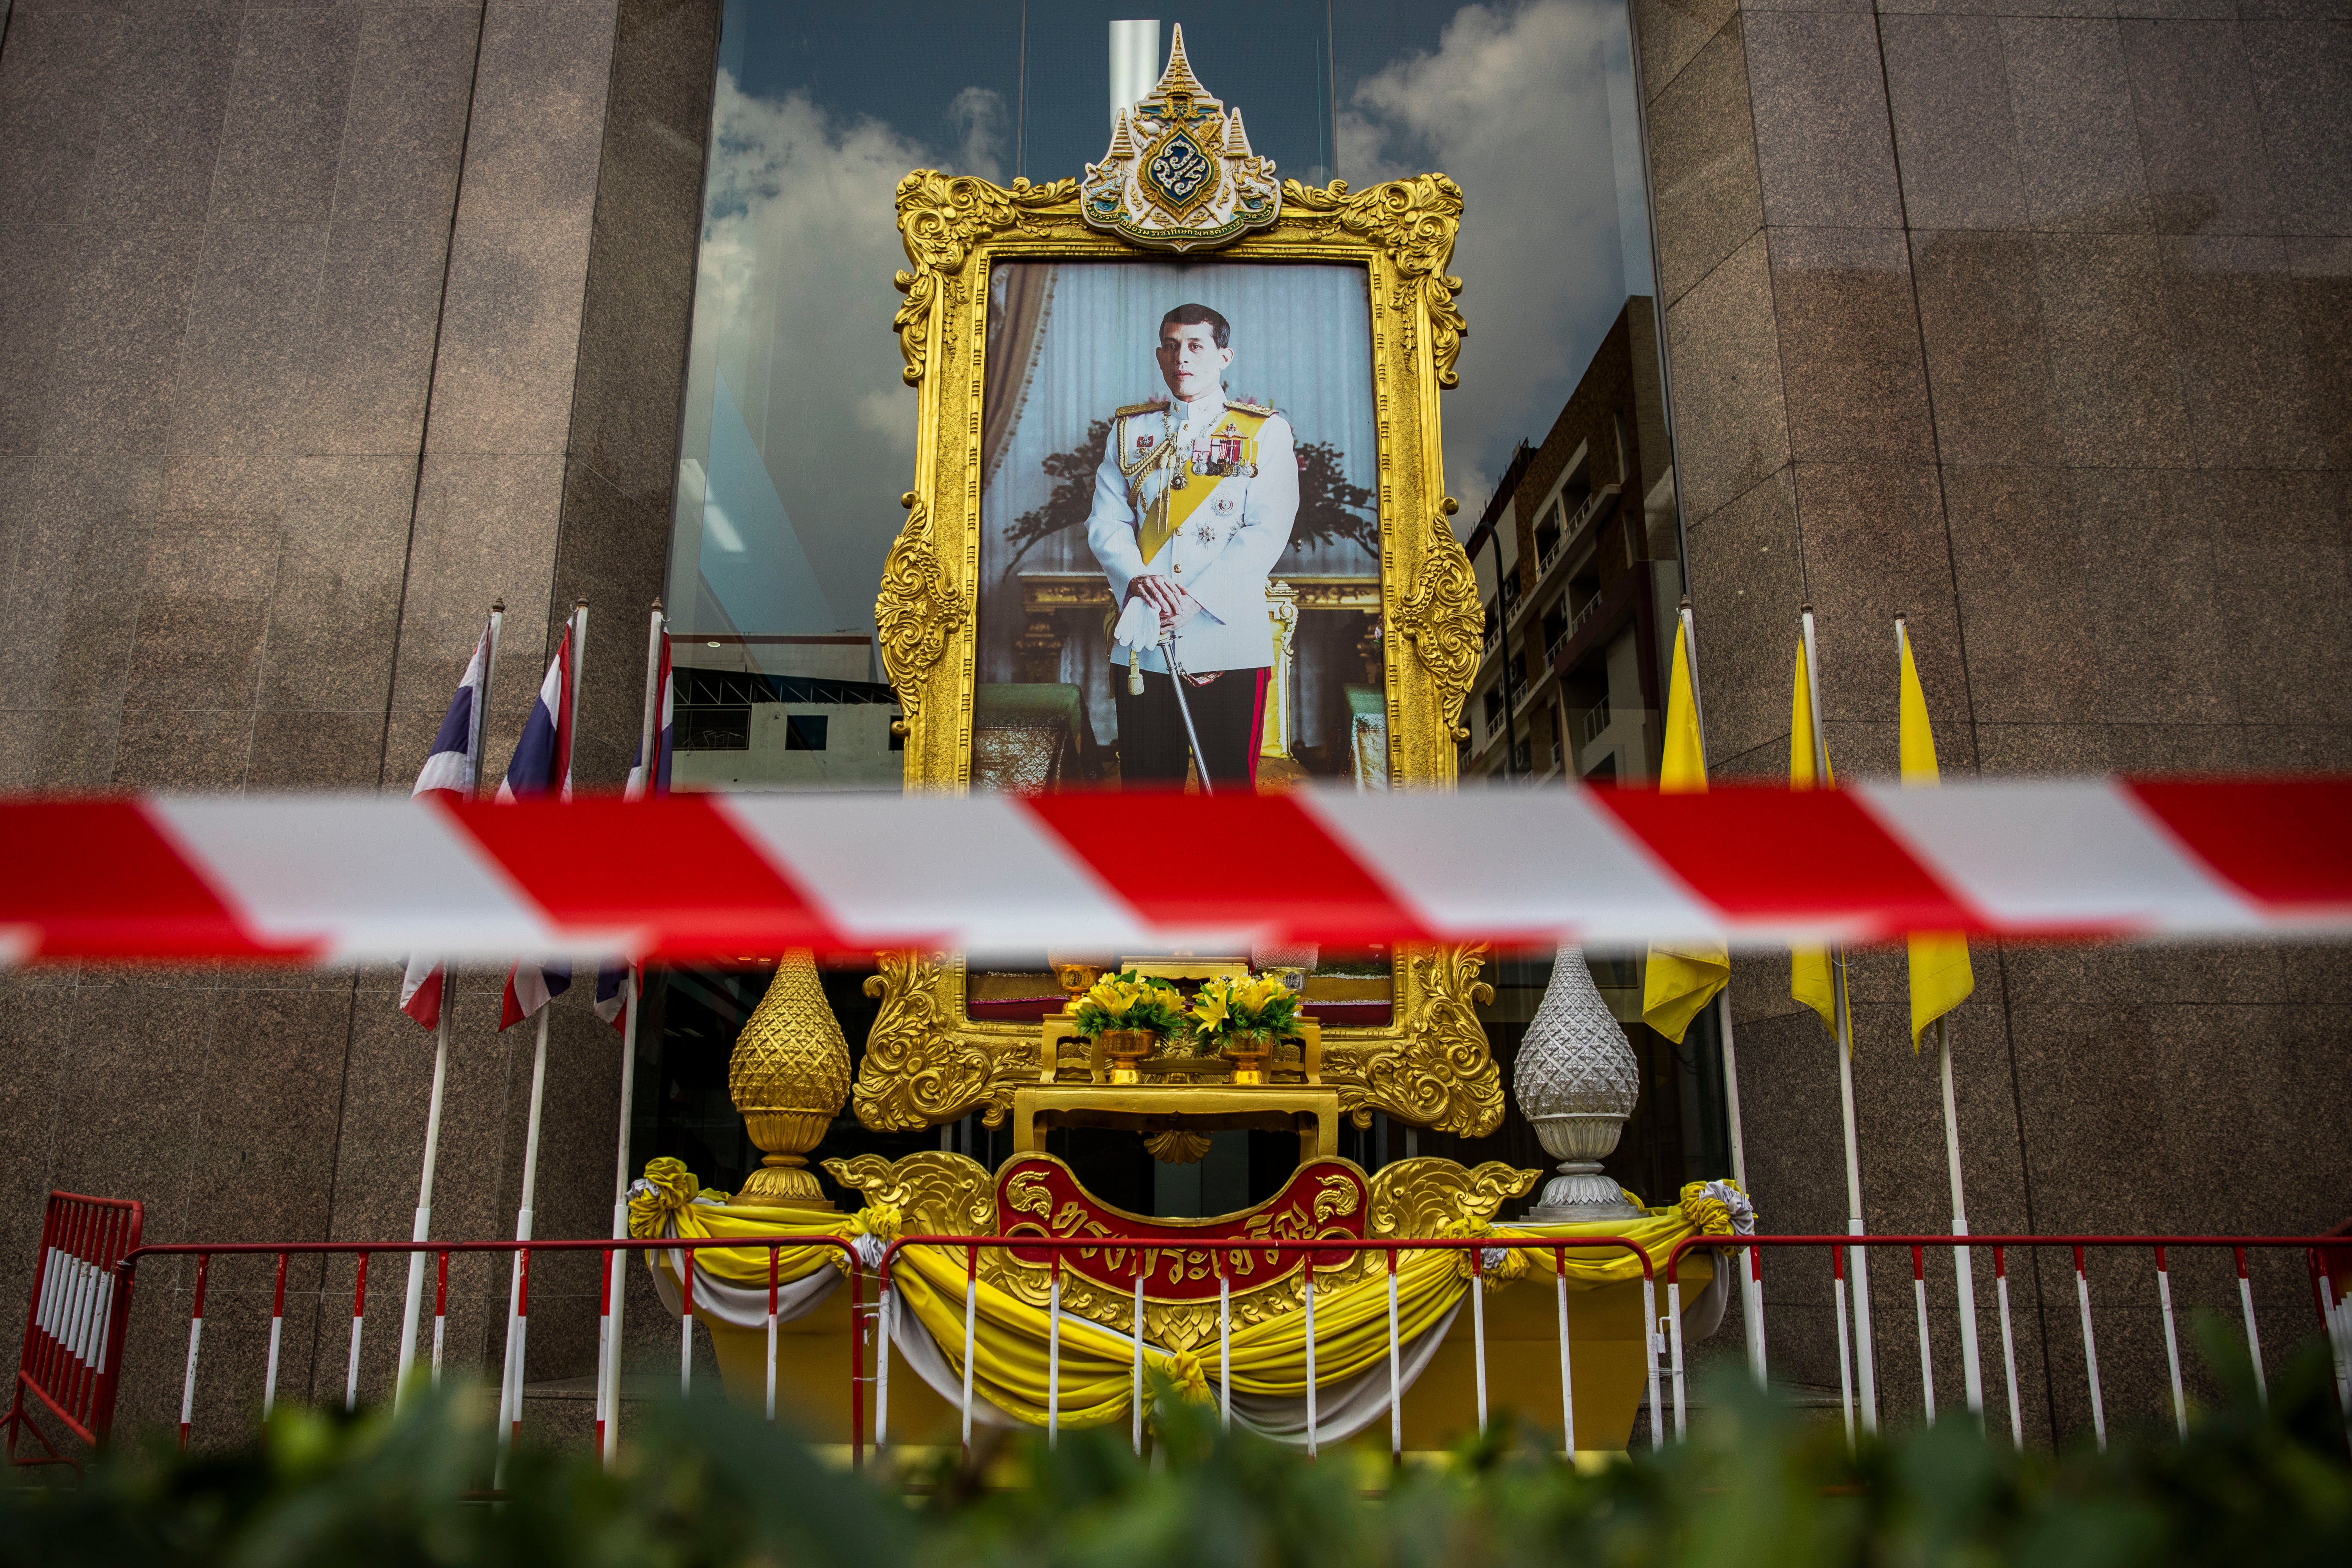 File photo: Police tape is put in front of a portrait of King Vajiralongkorn ahead of a pro-democracy demonstration in Bangkok, Thailand, 25 January 2021